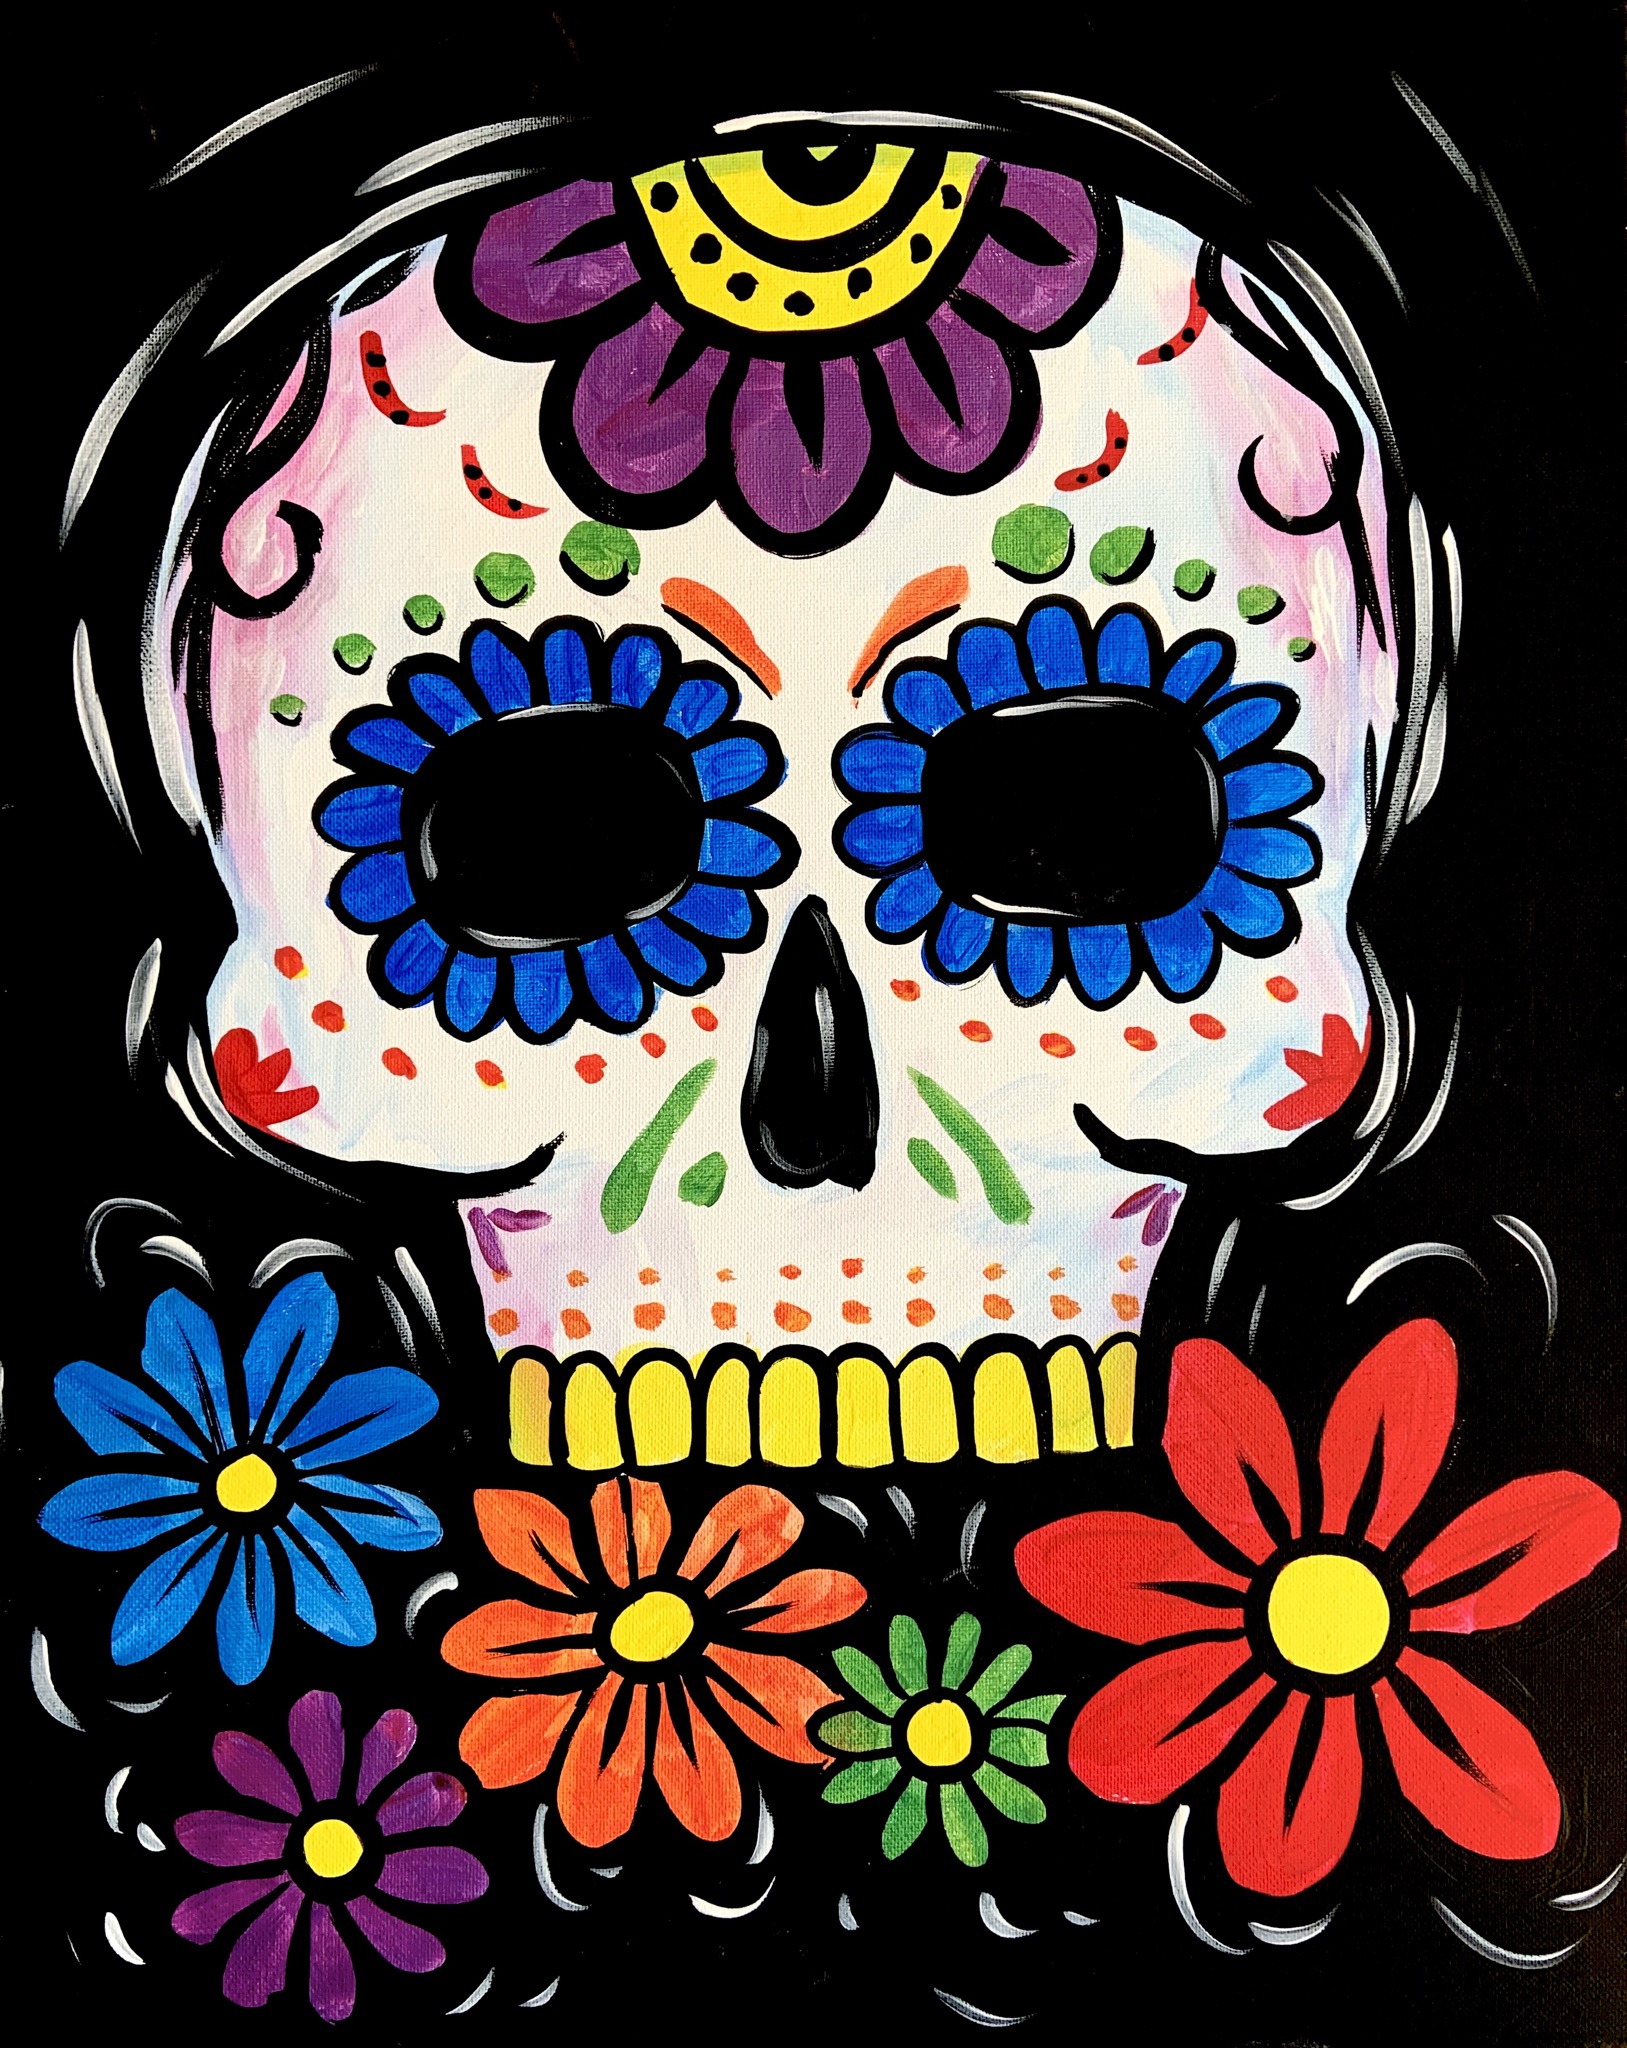 A Blooming Calavera experience project by Yaymaker